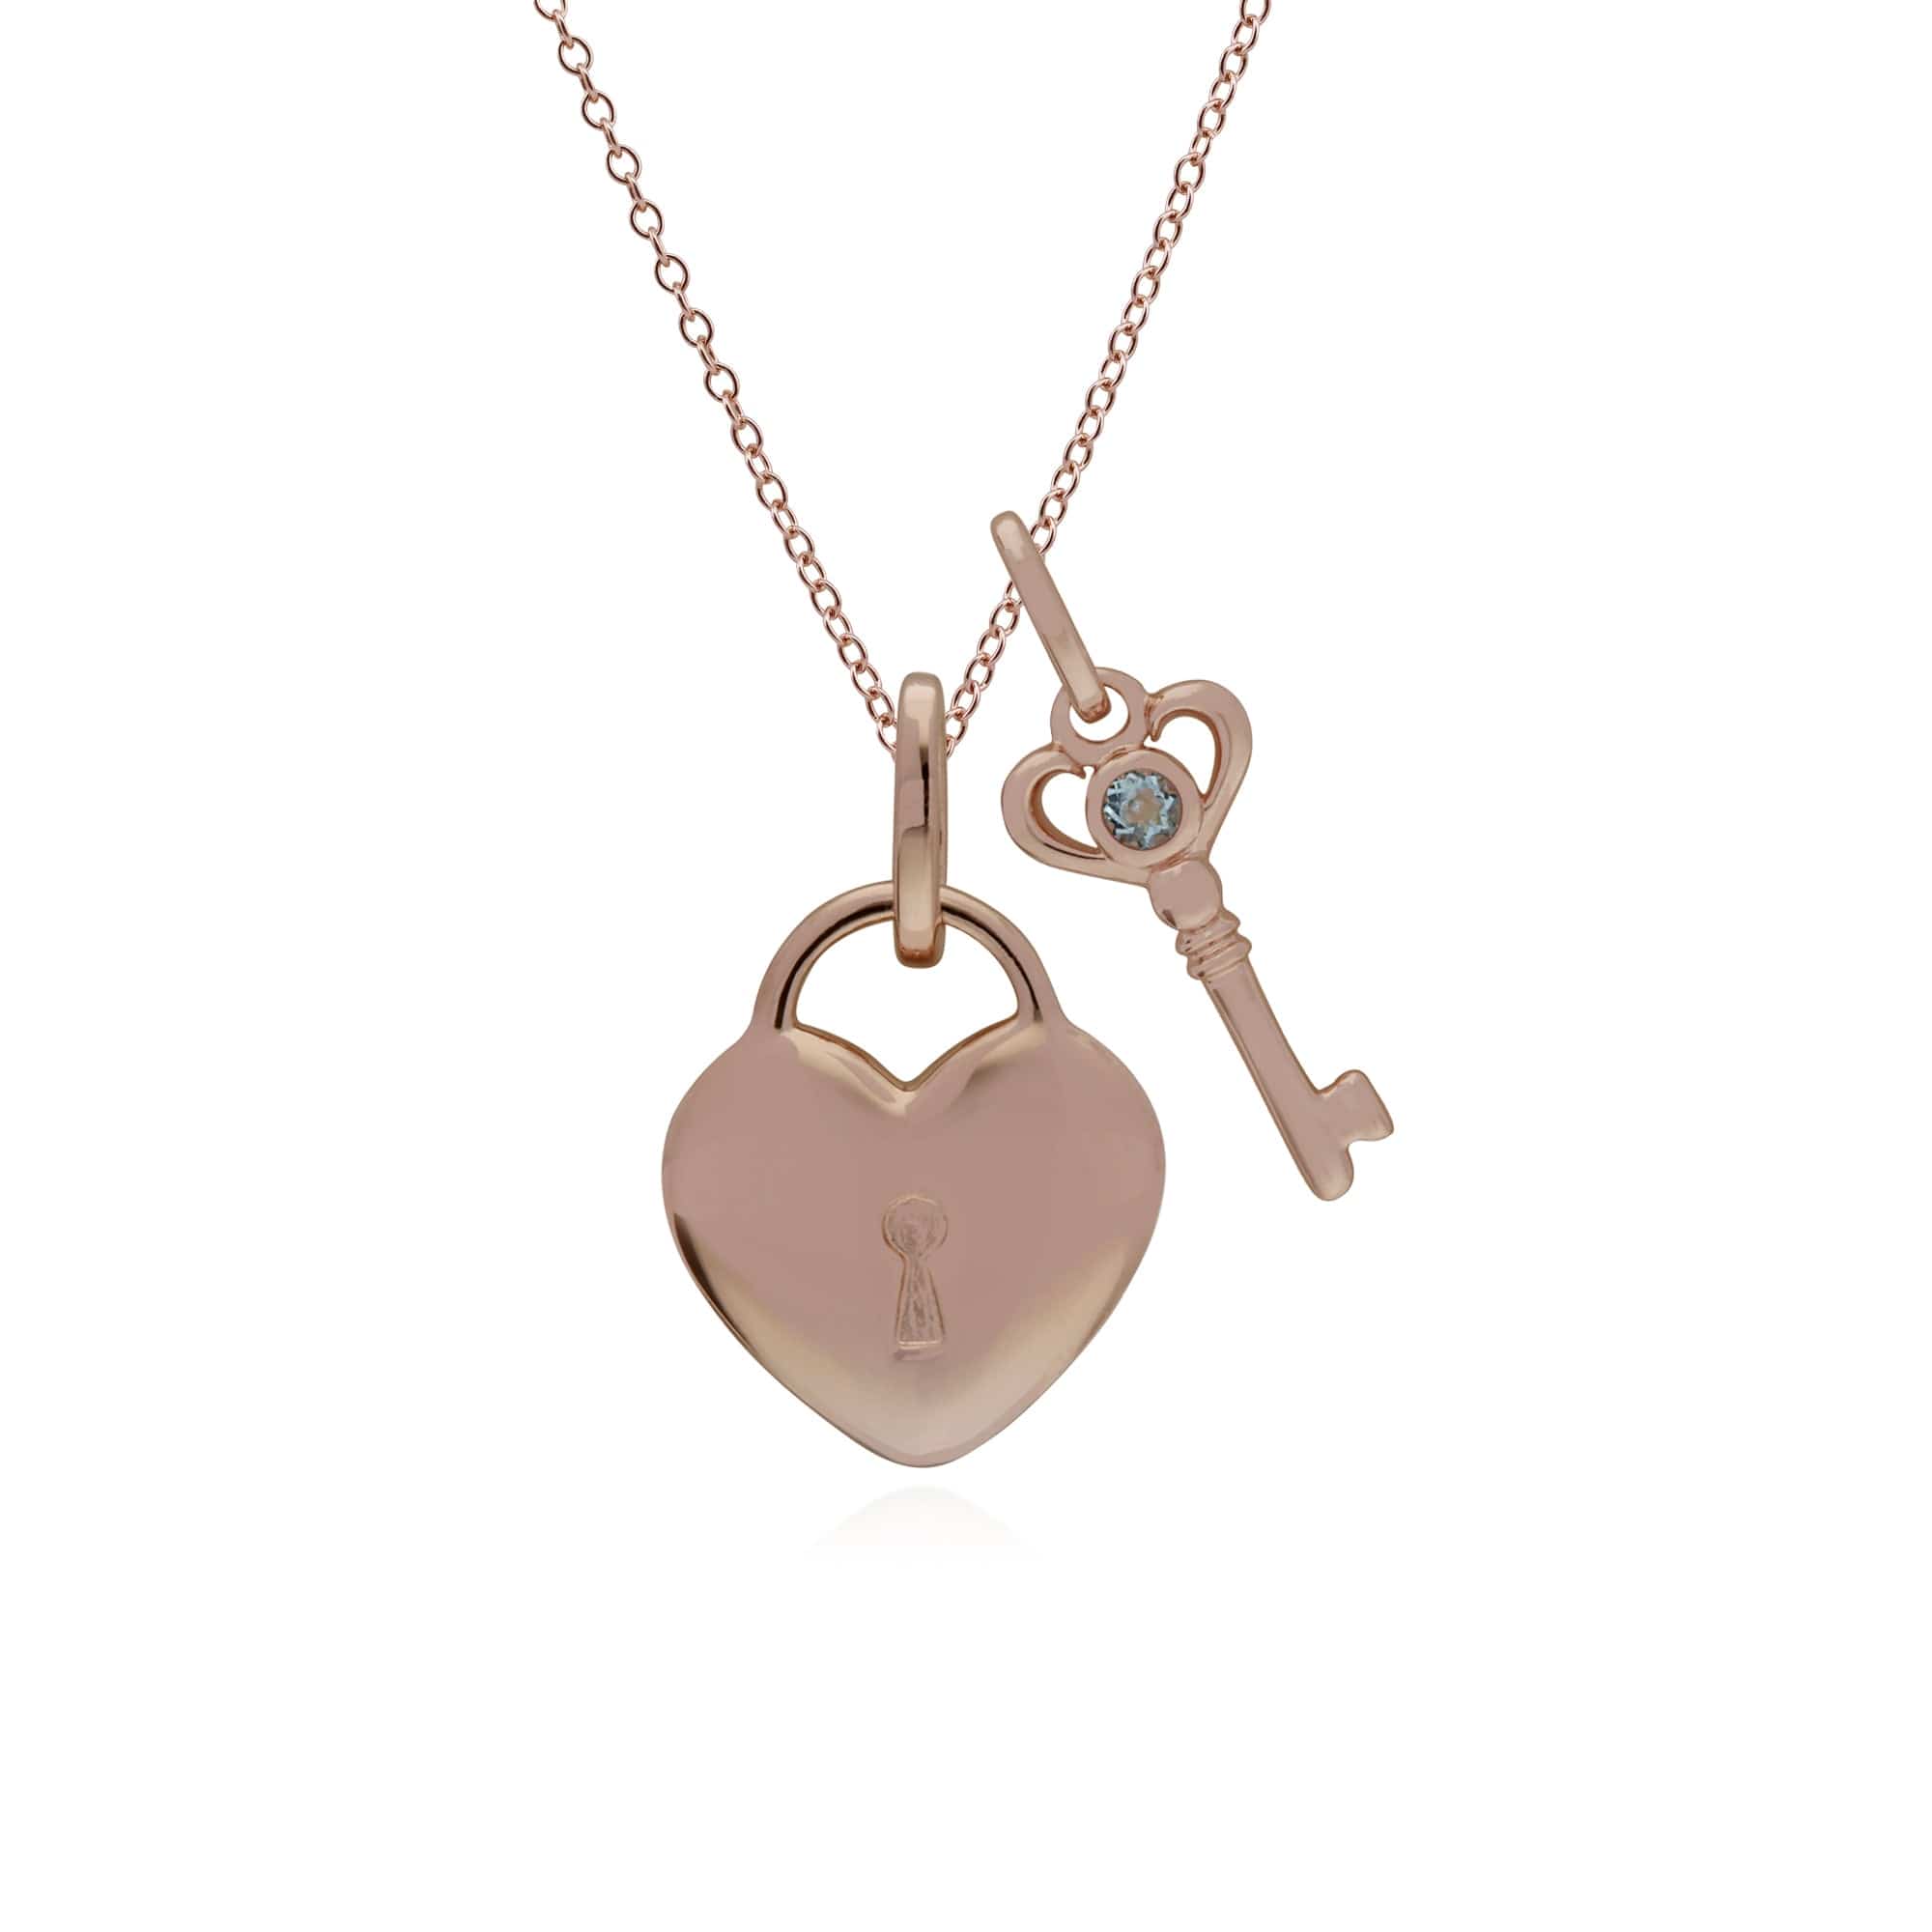 270P026309925-270P026901925 Classic Heart Lock Pendant & Aquamarine Key Charm in Rose Gold Plated 925 Sterling Silver 1